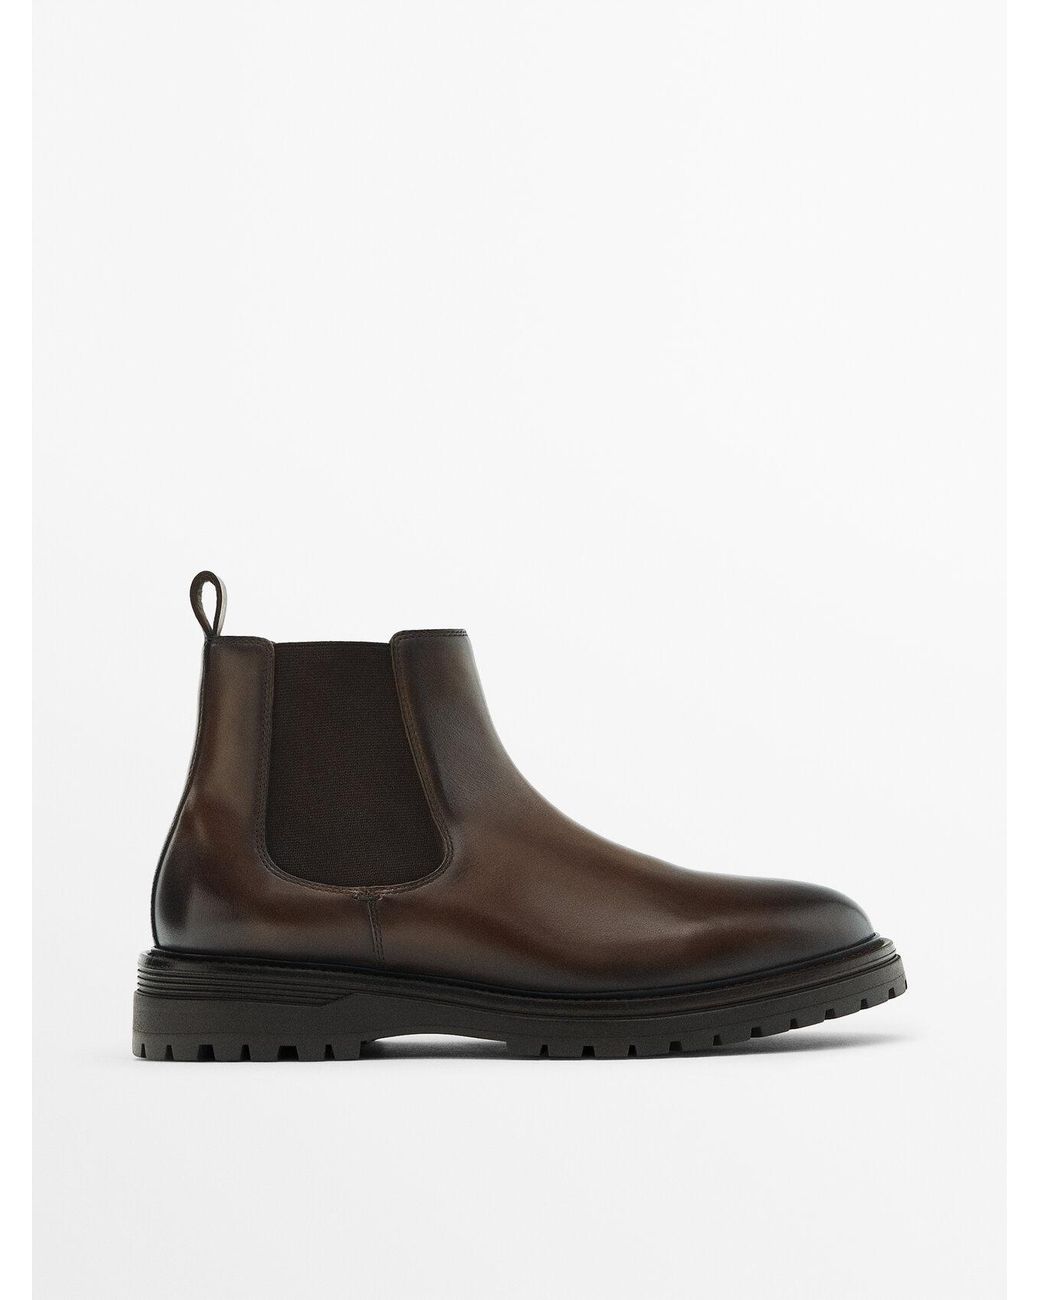 MASSIMO DUTTI Nappa Leather Chelsea Boots in Brown (Black) for Men | Lyst